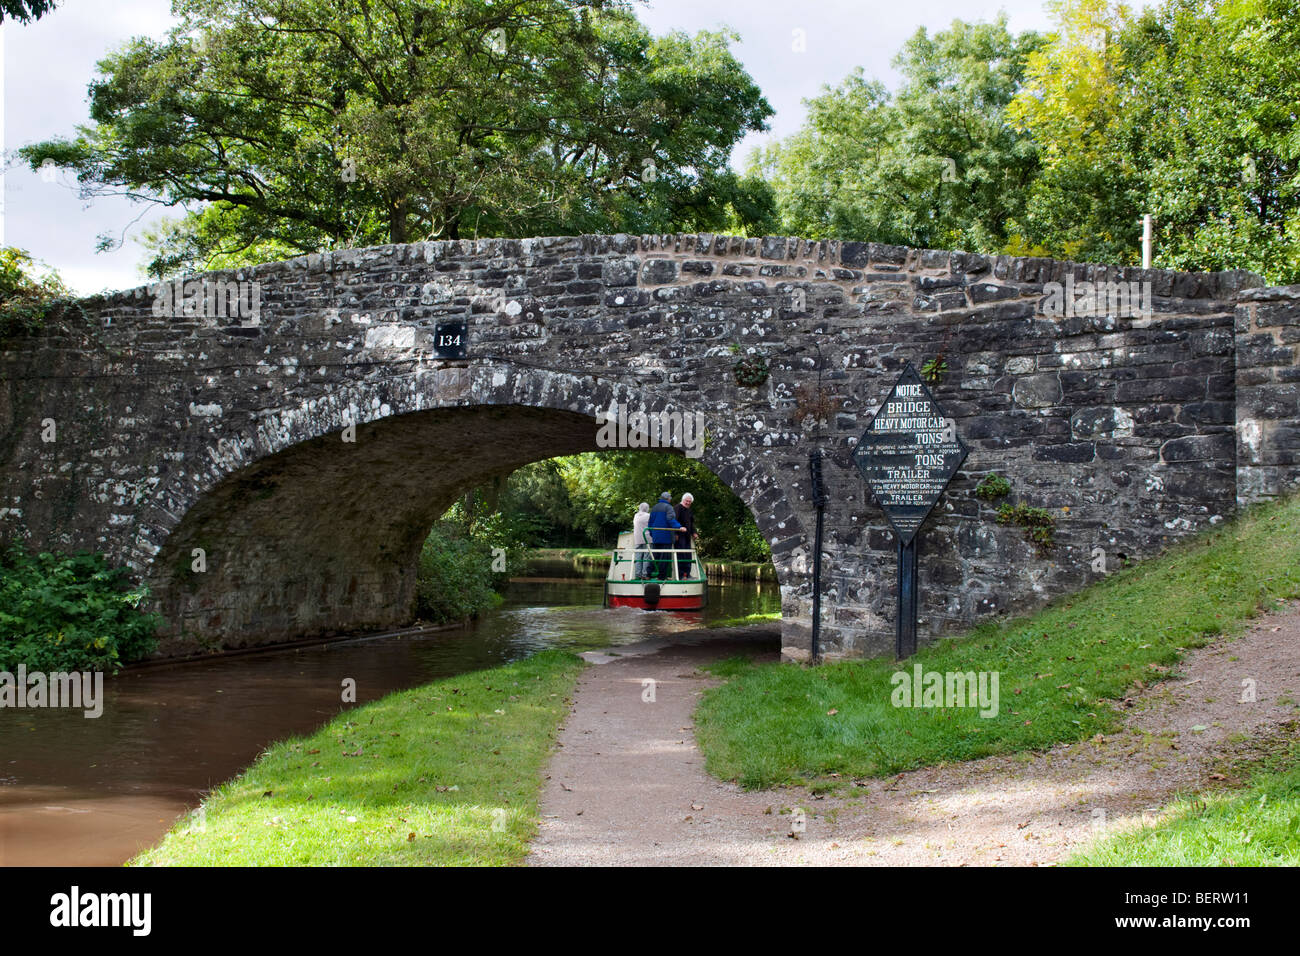 Canal boat saling under old stone bridge 134 on the Monmouth and Brecon Canal taken at Llangynidr mid Wales on fine day Stock Photo